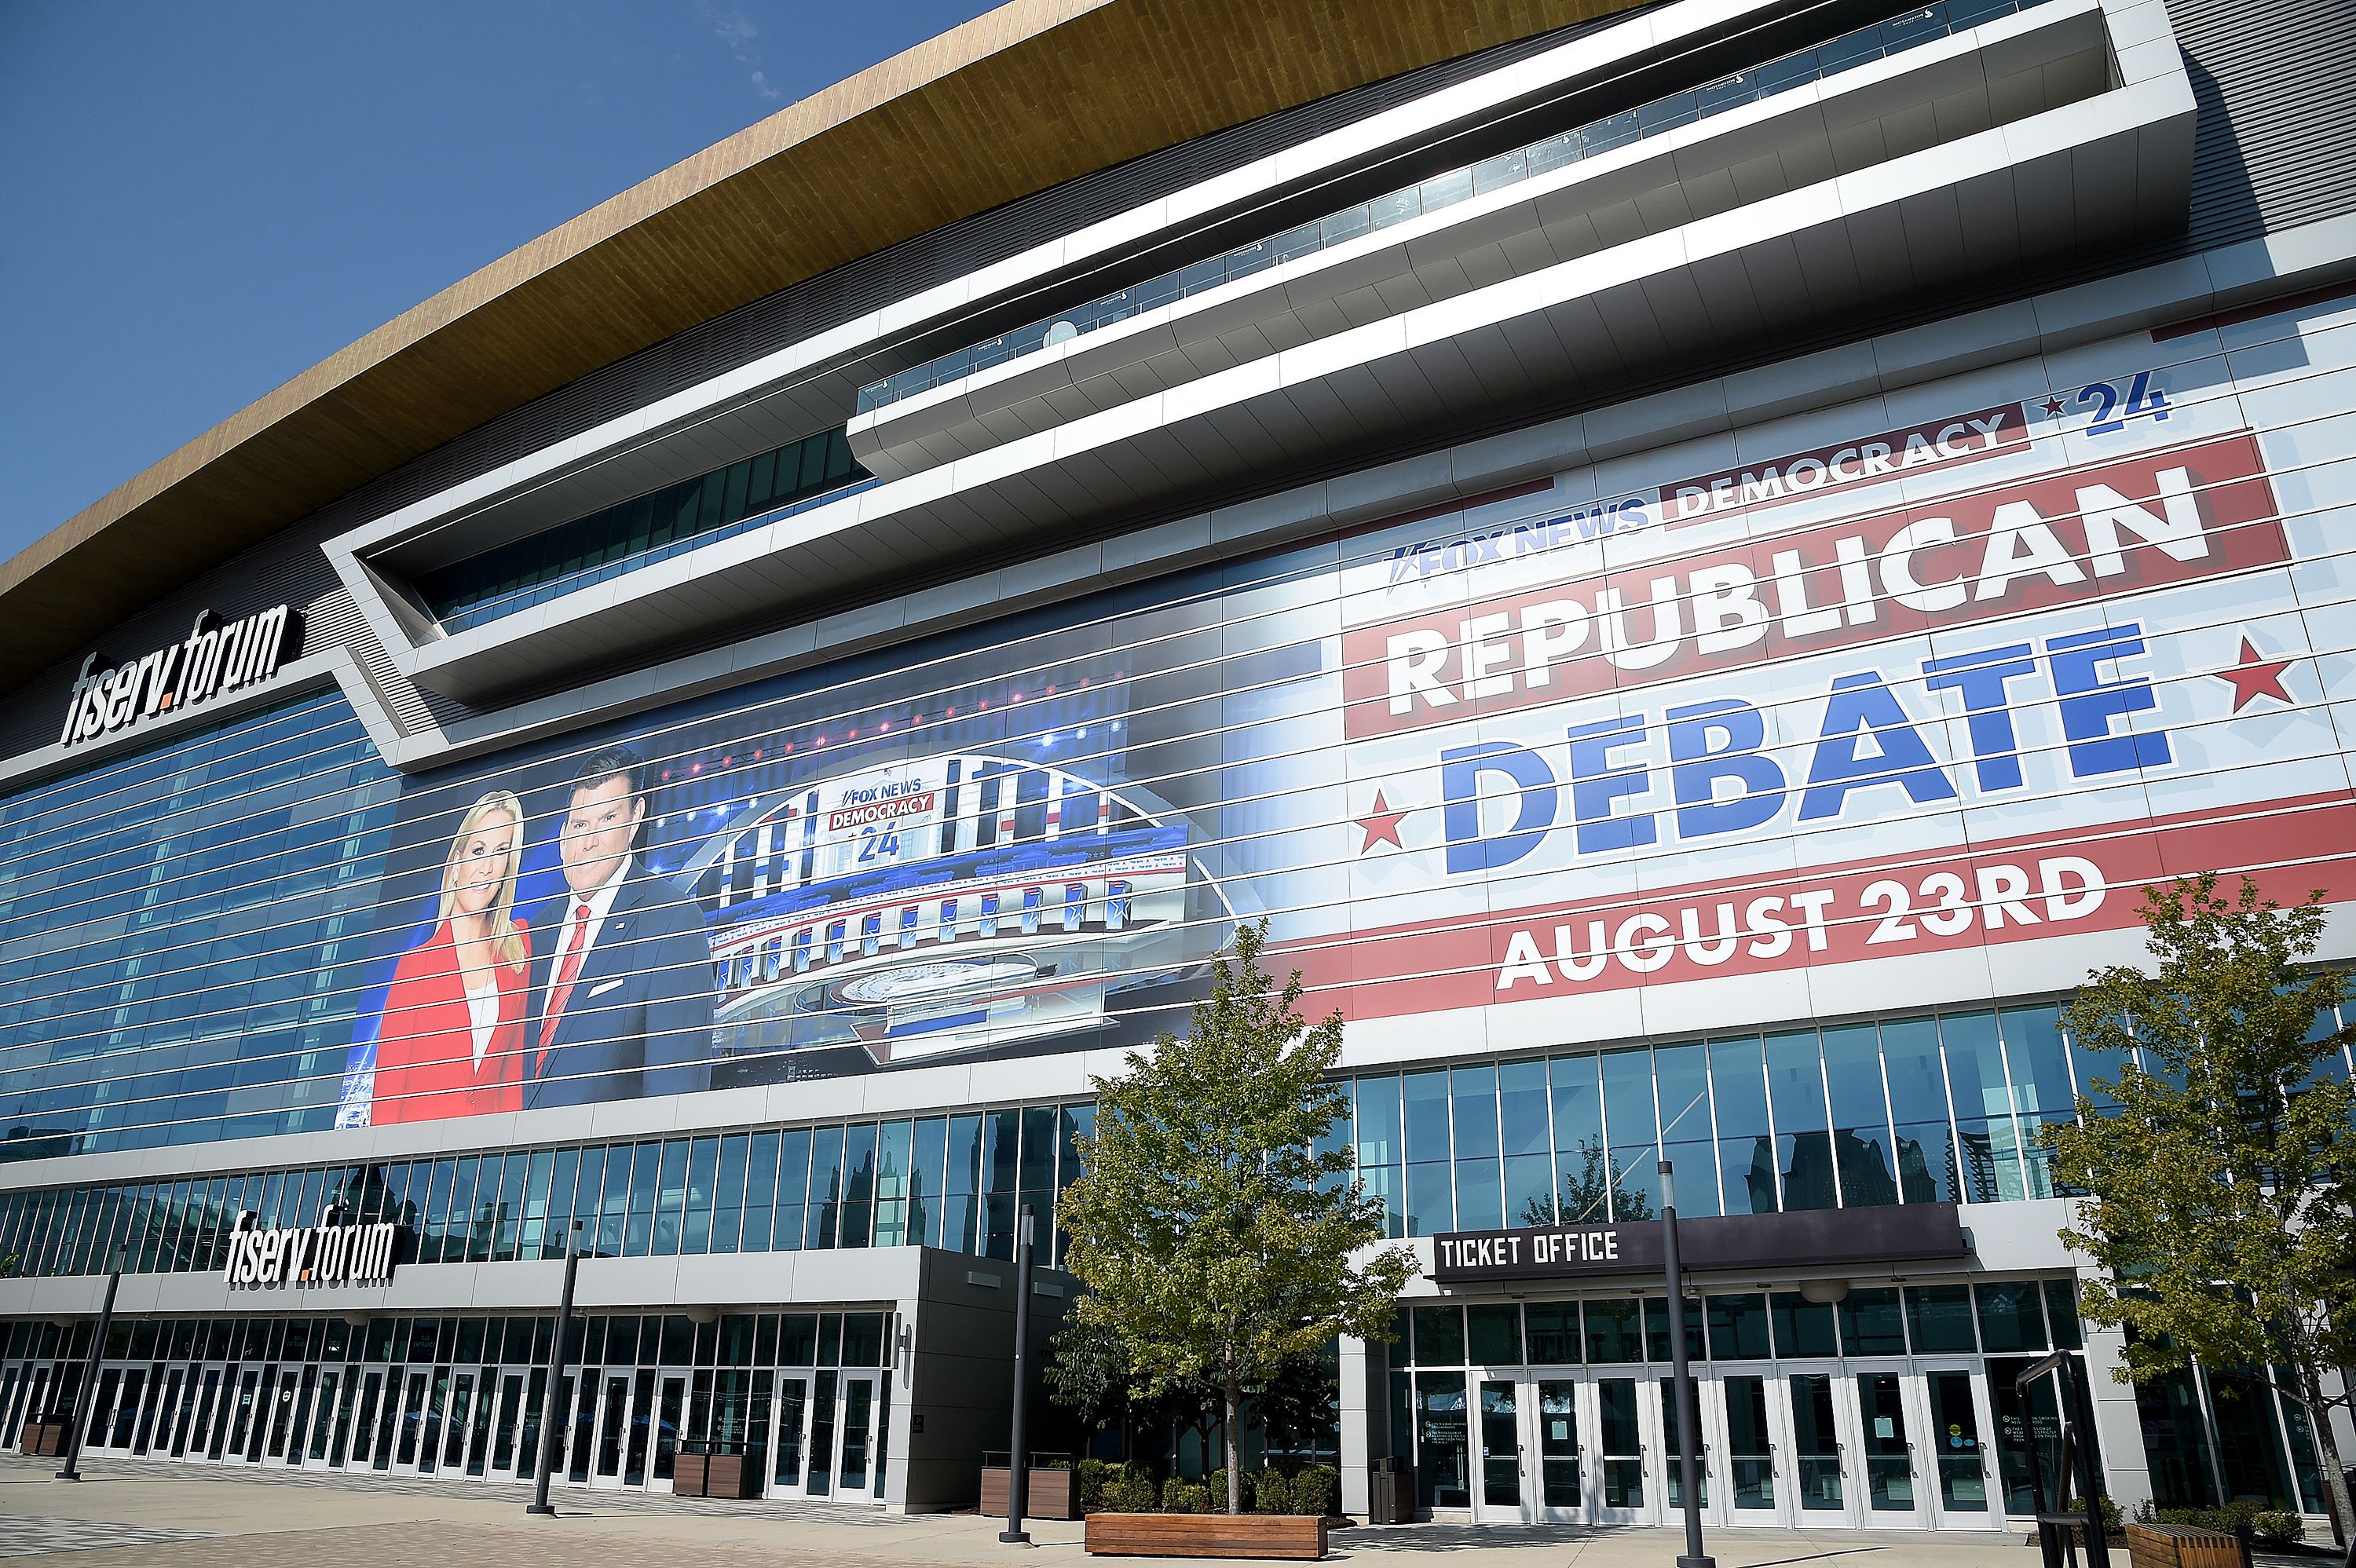 A large banner, including the images of Bret Baier and Martha MacCallum, hangs over the arena where the first GOP debate is to be held.